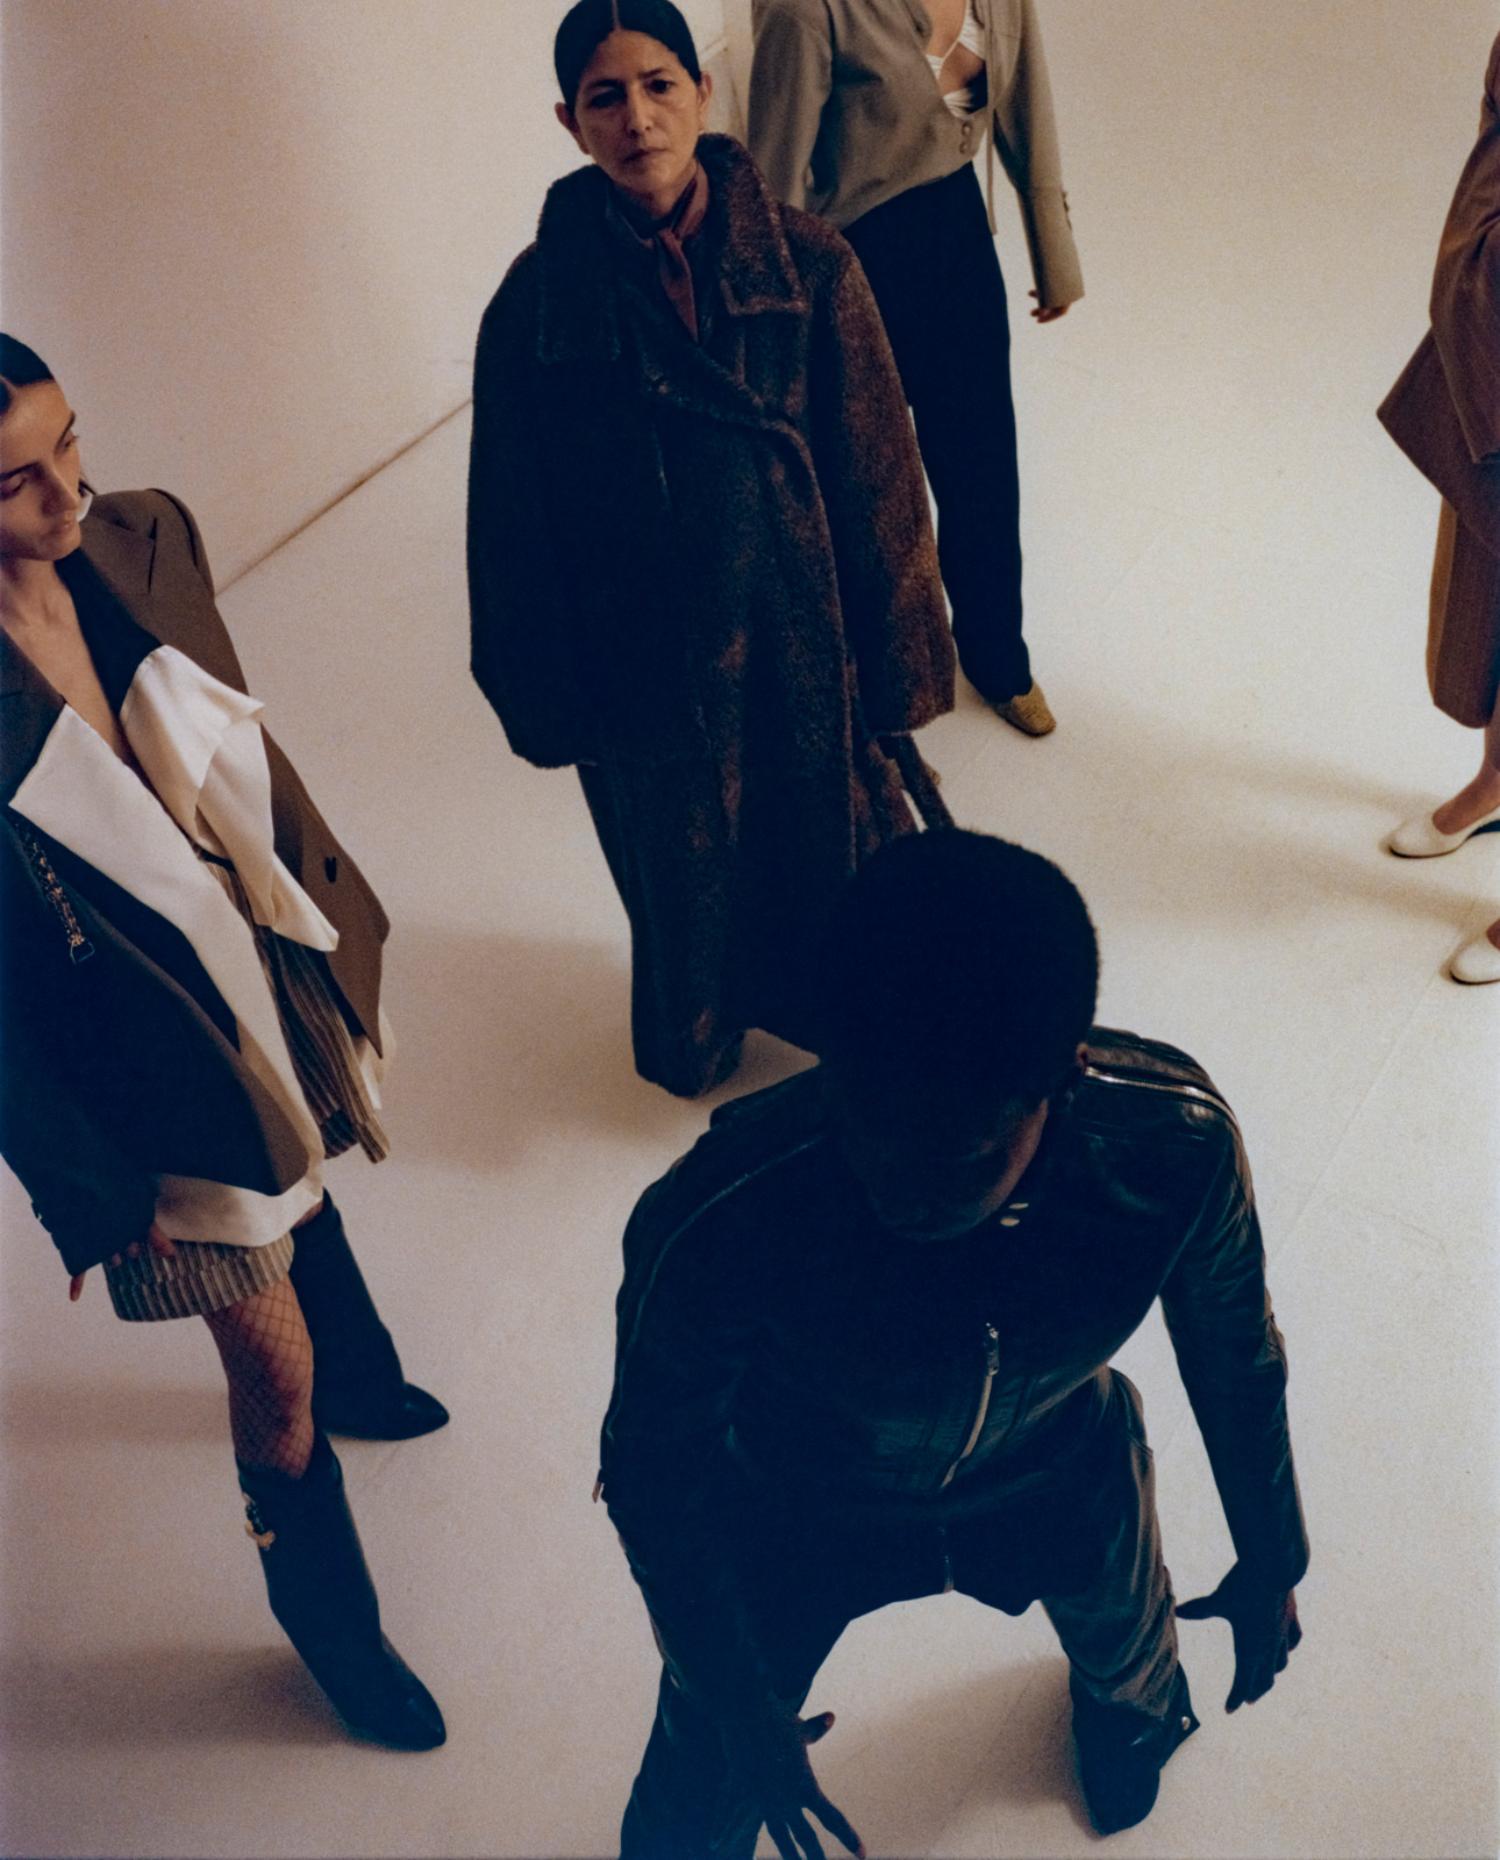 Alexandra Beryl Stein, Anna Bertrand, Zayna Cisse, Gabriela Castello & Sonia Ichti by Laura Marie Cieplik & Lauren Coppen for Document Journal Online Summer 2021. Clothing & Accessories: Shirt and coat by Lemaire. Jacket, trousers, shorts, and shoes by Givenchy. Shirt and jacket by Sacai. Tights by Wolford. Boots by Givenchy. Shirt and shoes by DROMe; Top by Sid Neigum; Trousers by Botter; Socks by Falke. Jacket and shorts by MSGM; Vintage shoes by Yohji Yamamoto